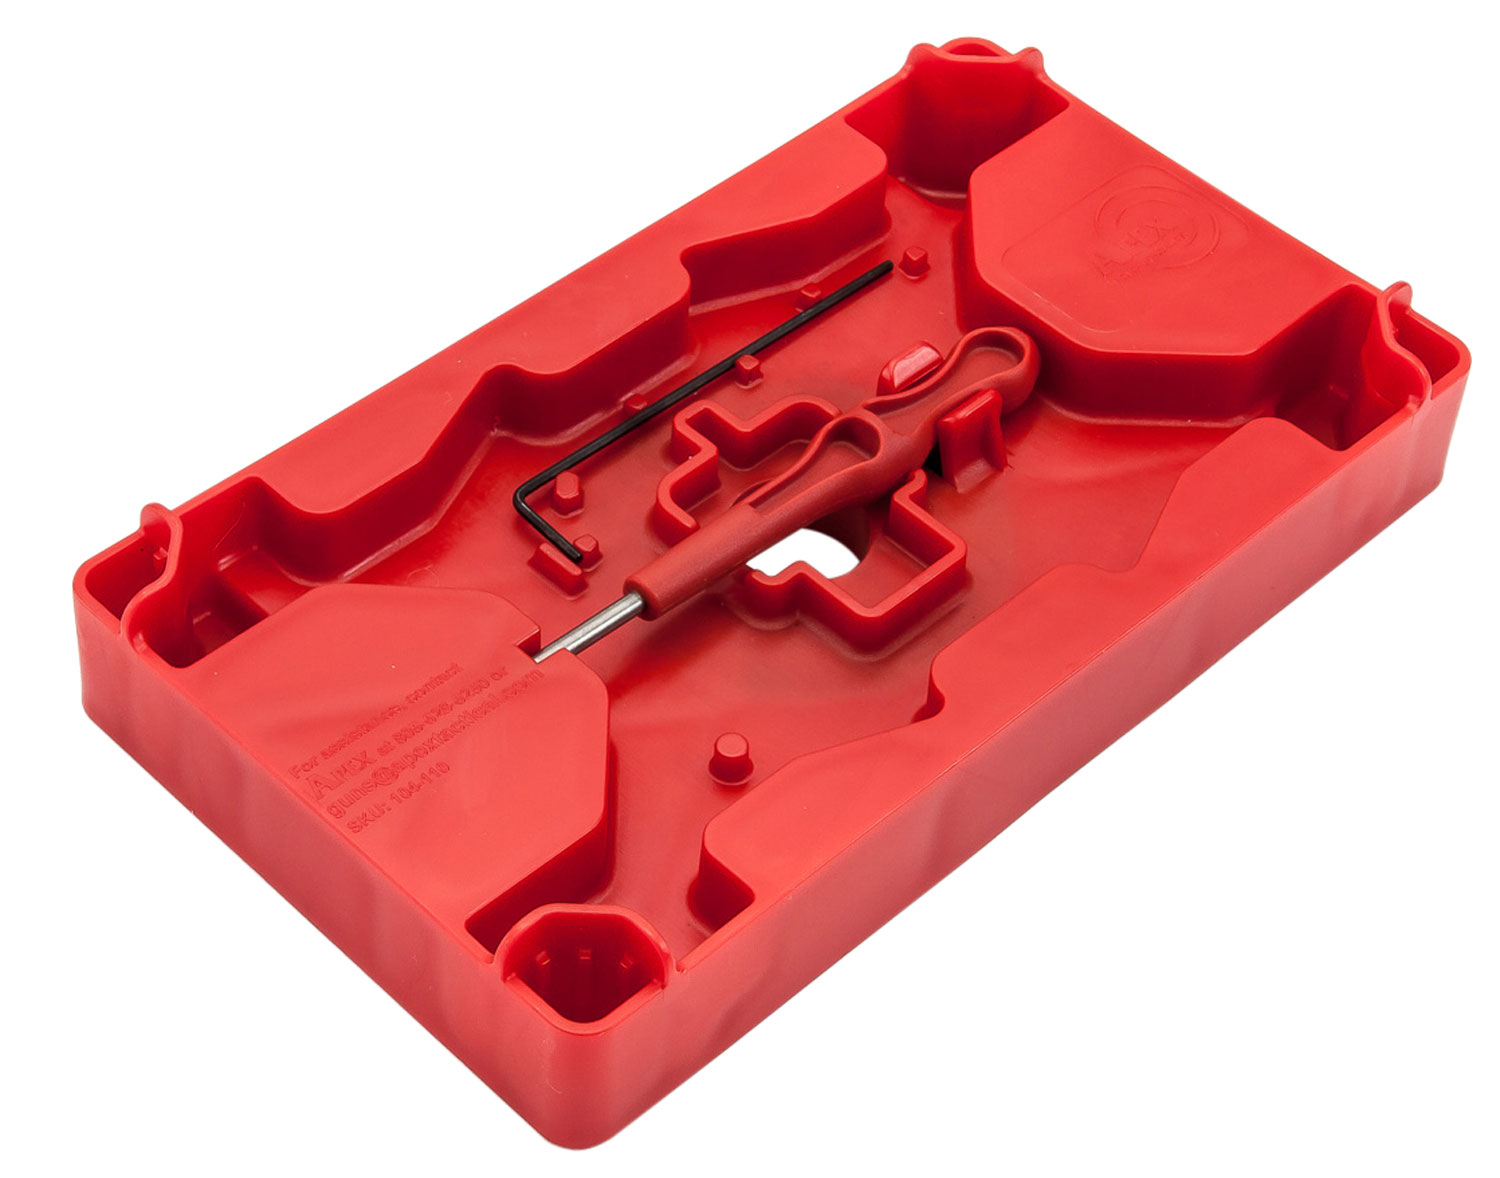 Apex Tactical 104110 Armorers Tray & Pin Punch  Red Polymer Pistol